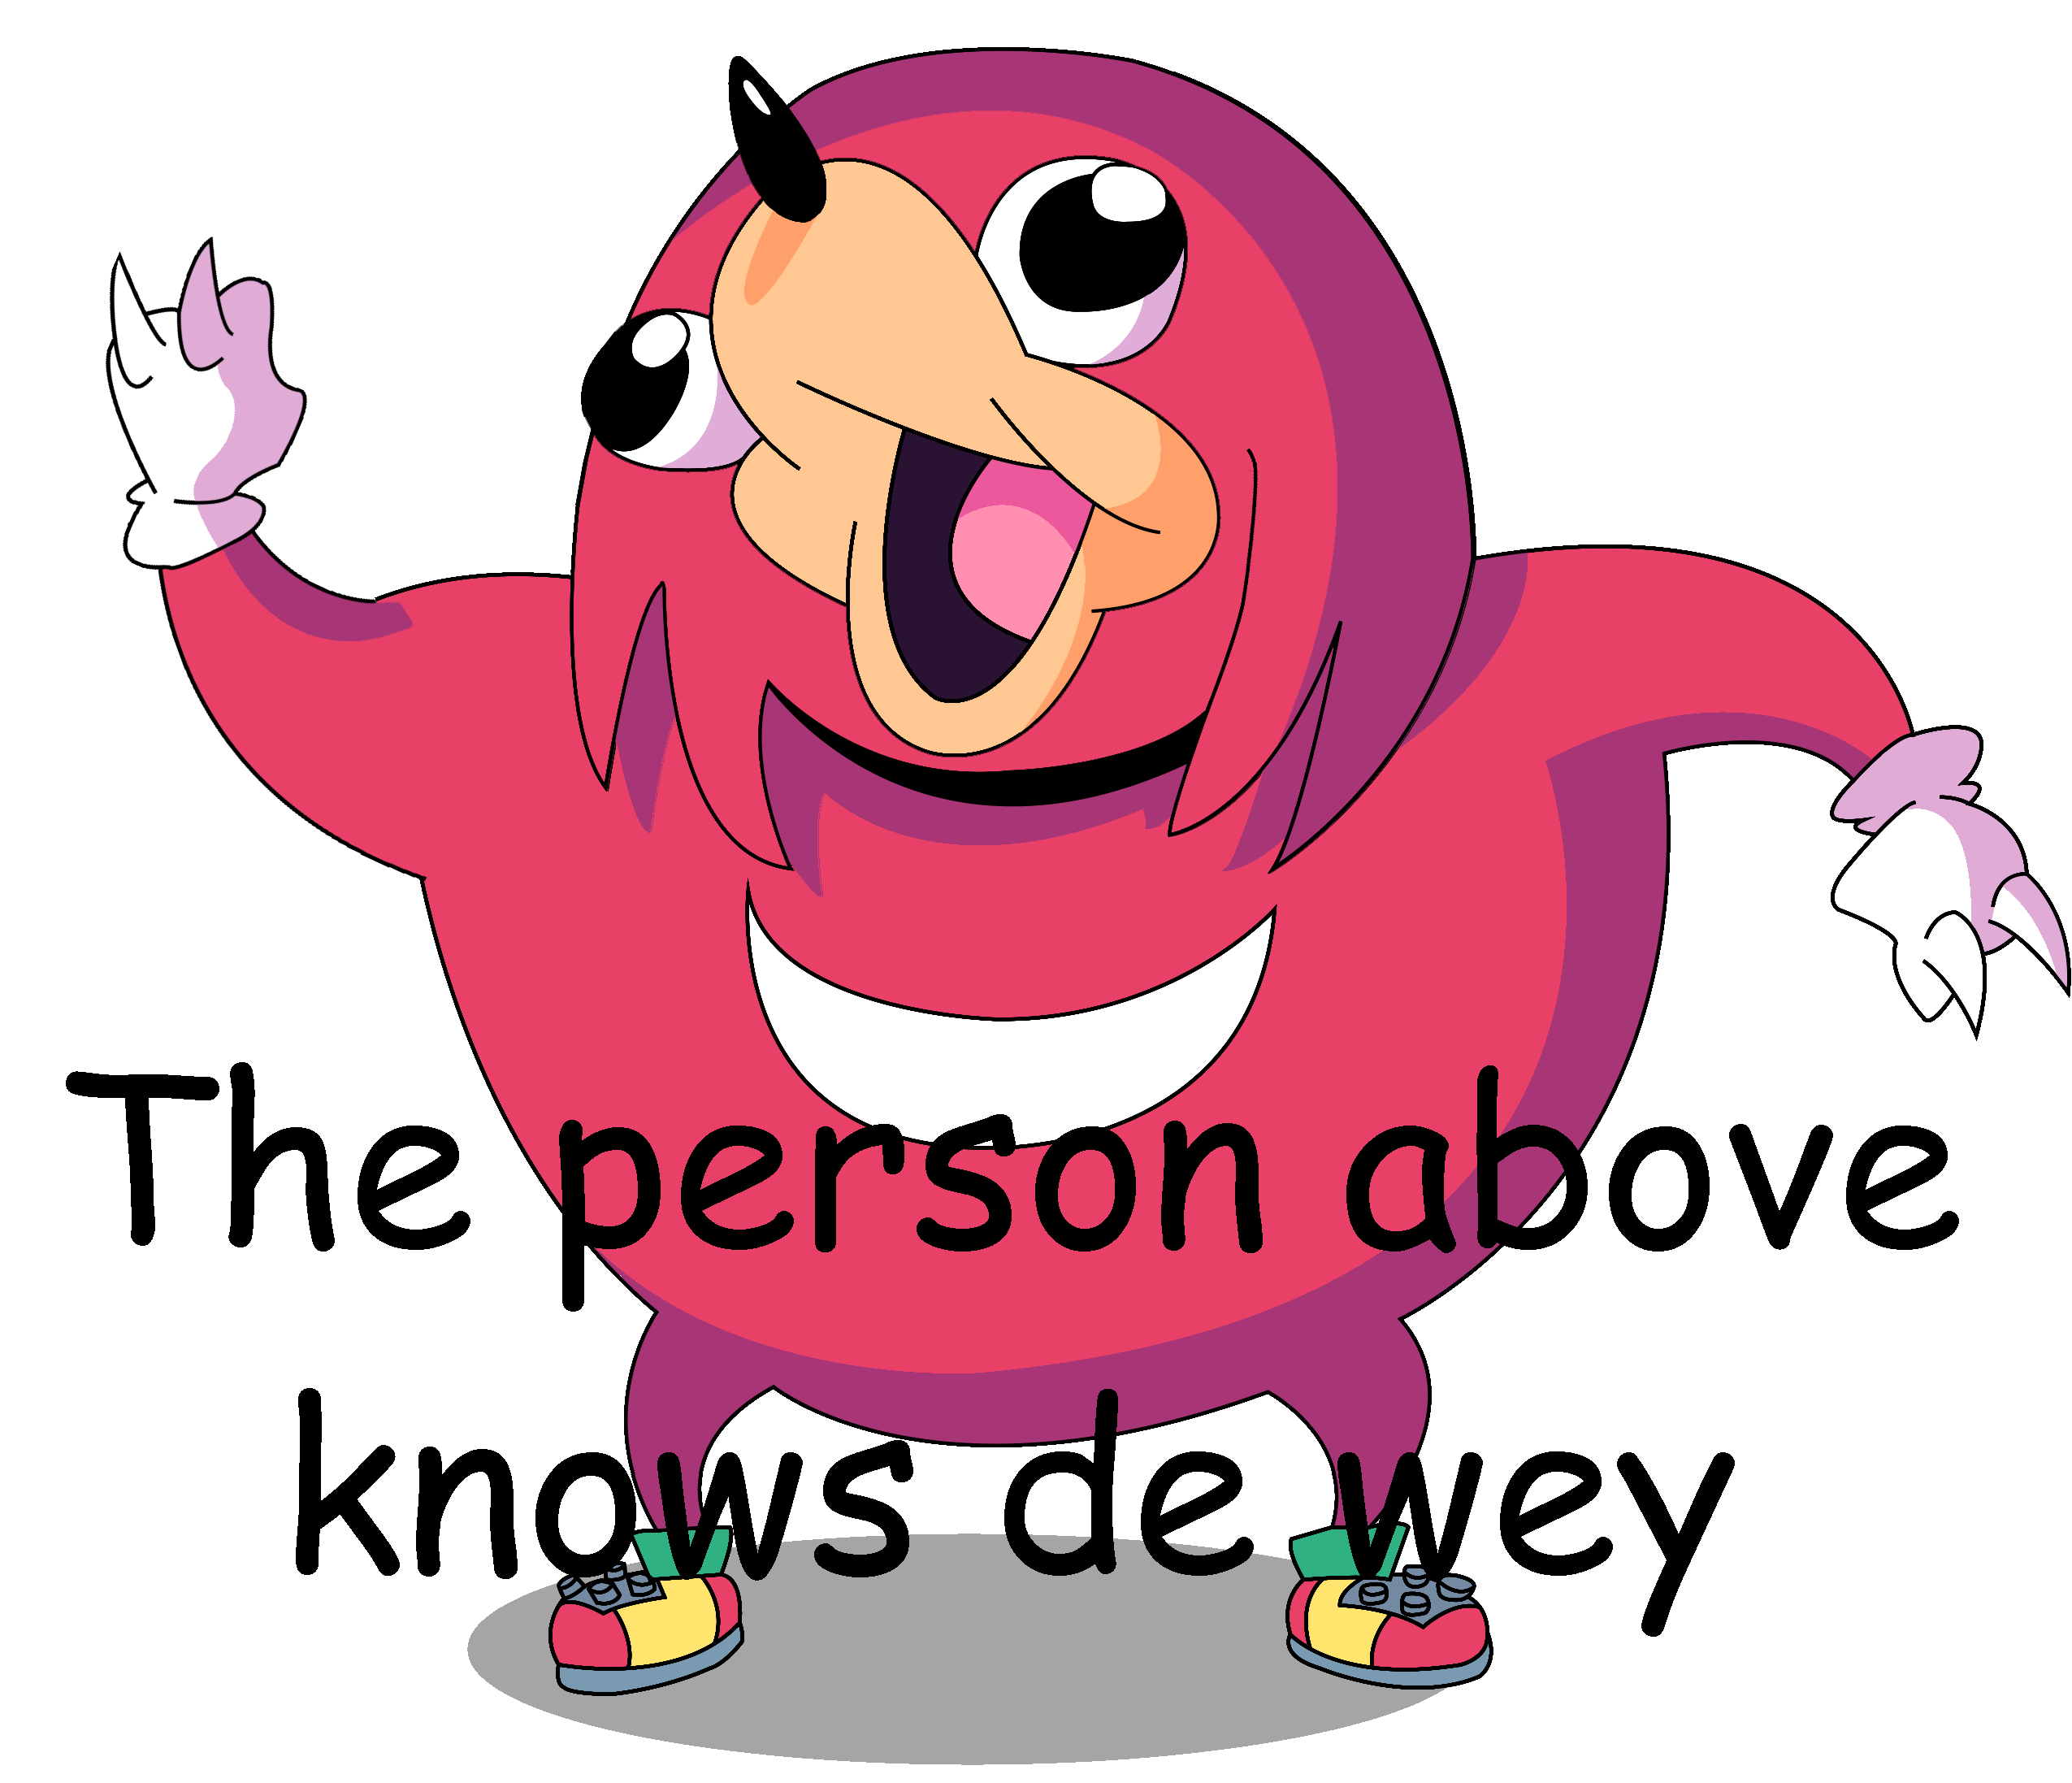 The person above knows de wey.